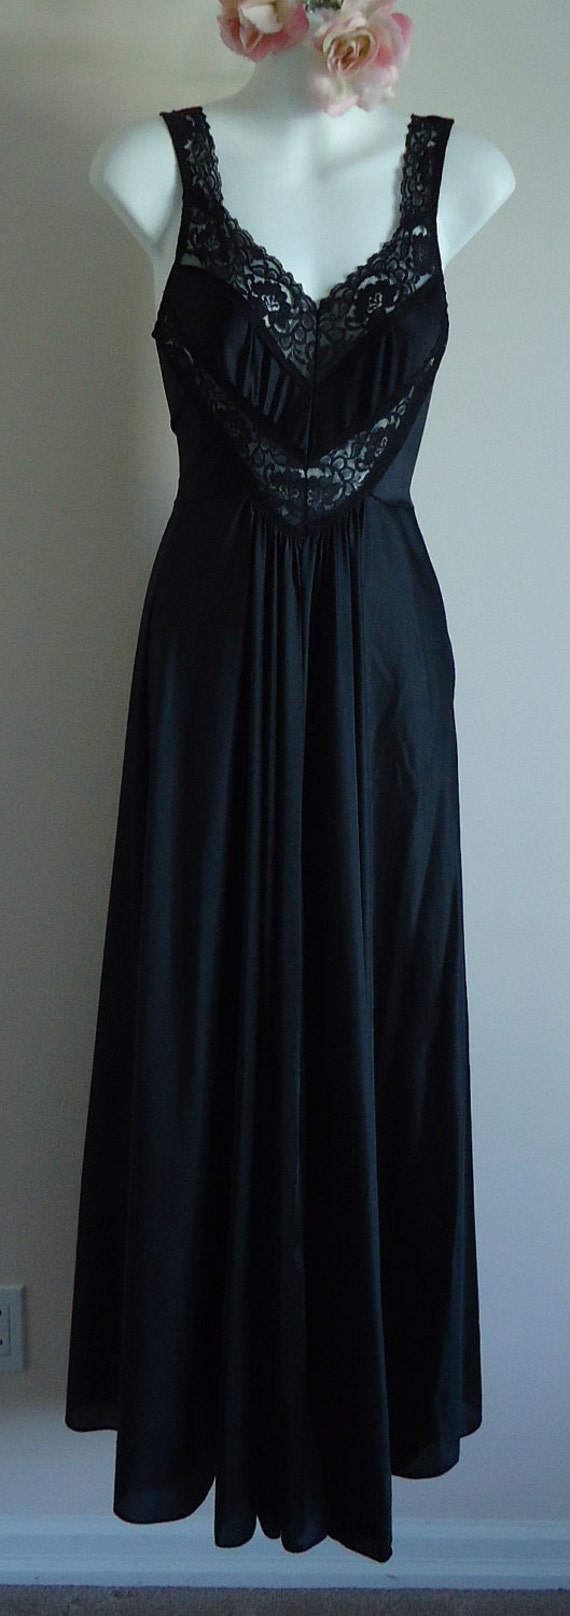 Vintage 1980s Undercover Wear Black Nightgown by MadMakCloset